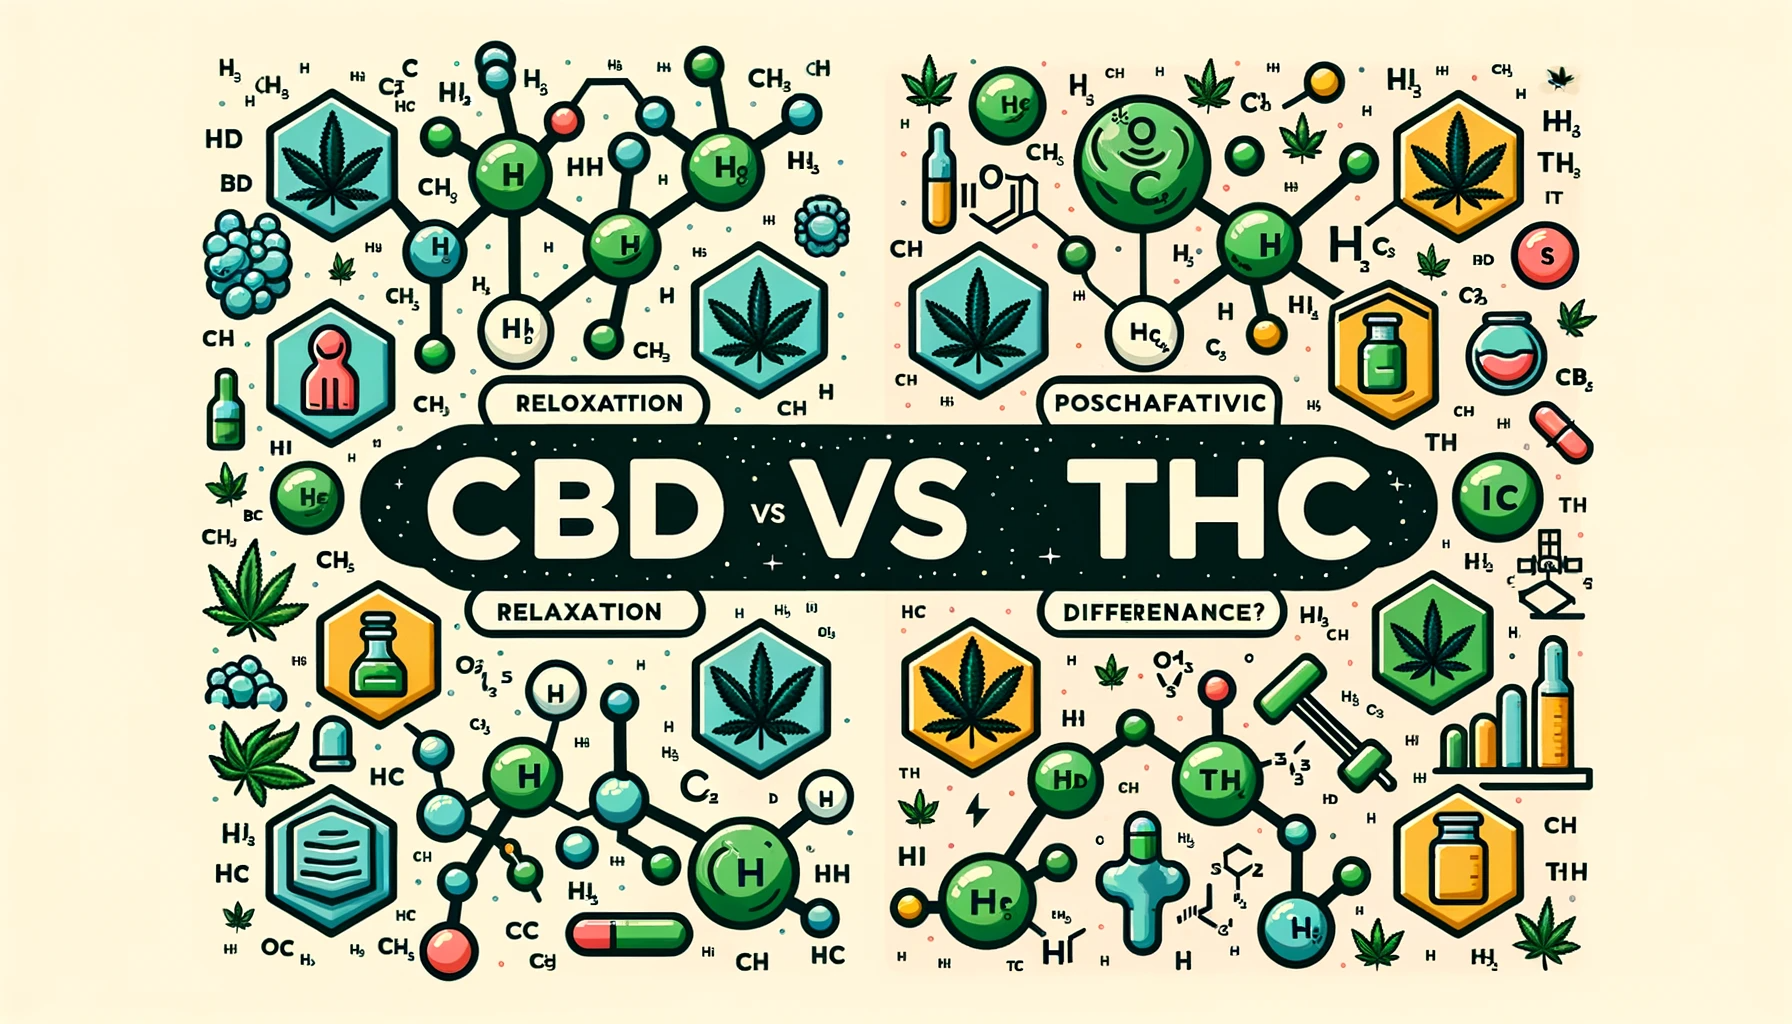 illustration depicting a clear comparison between CBD and THC.